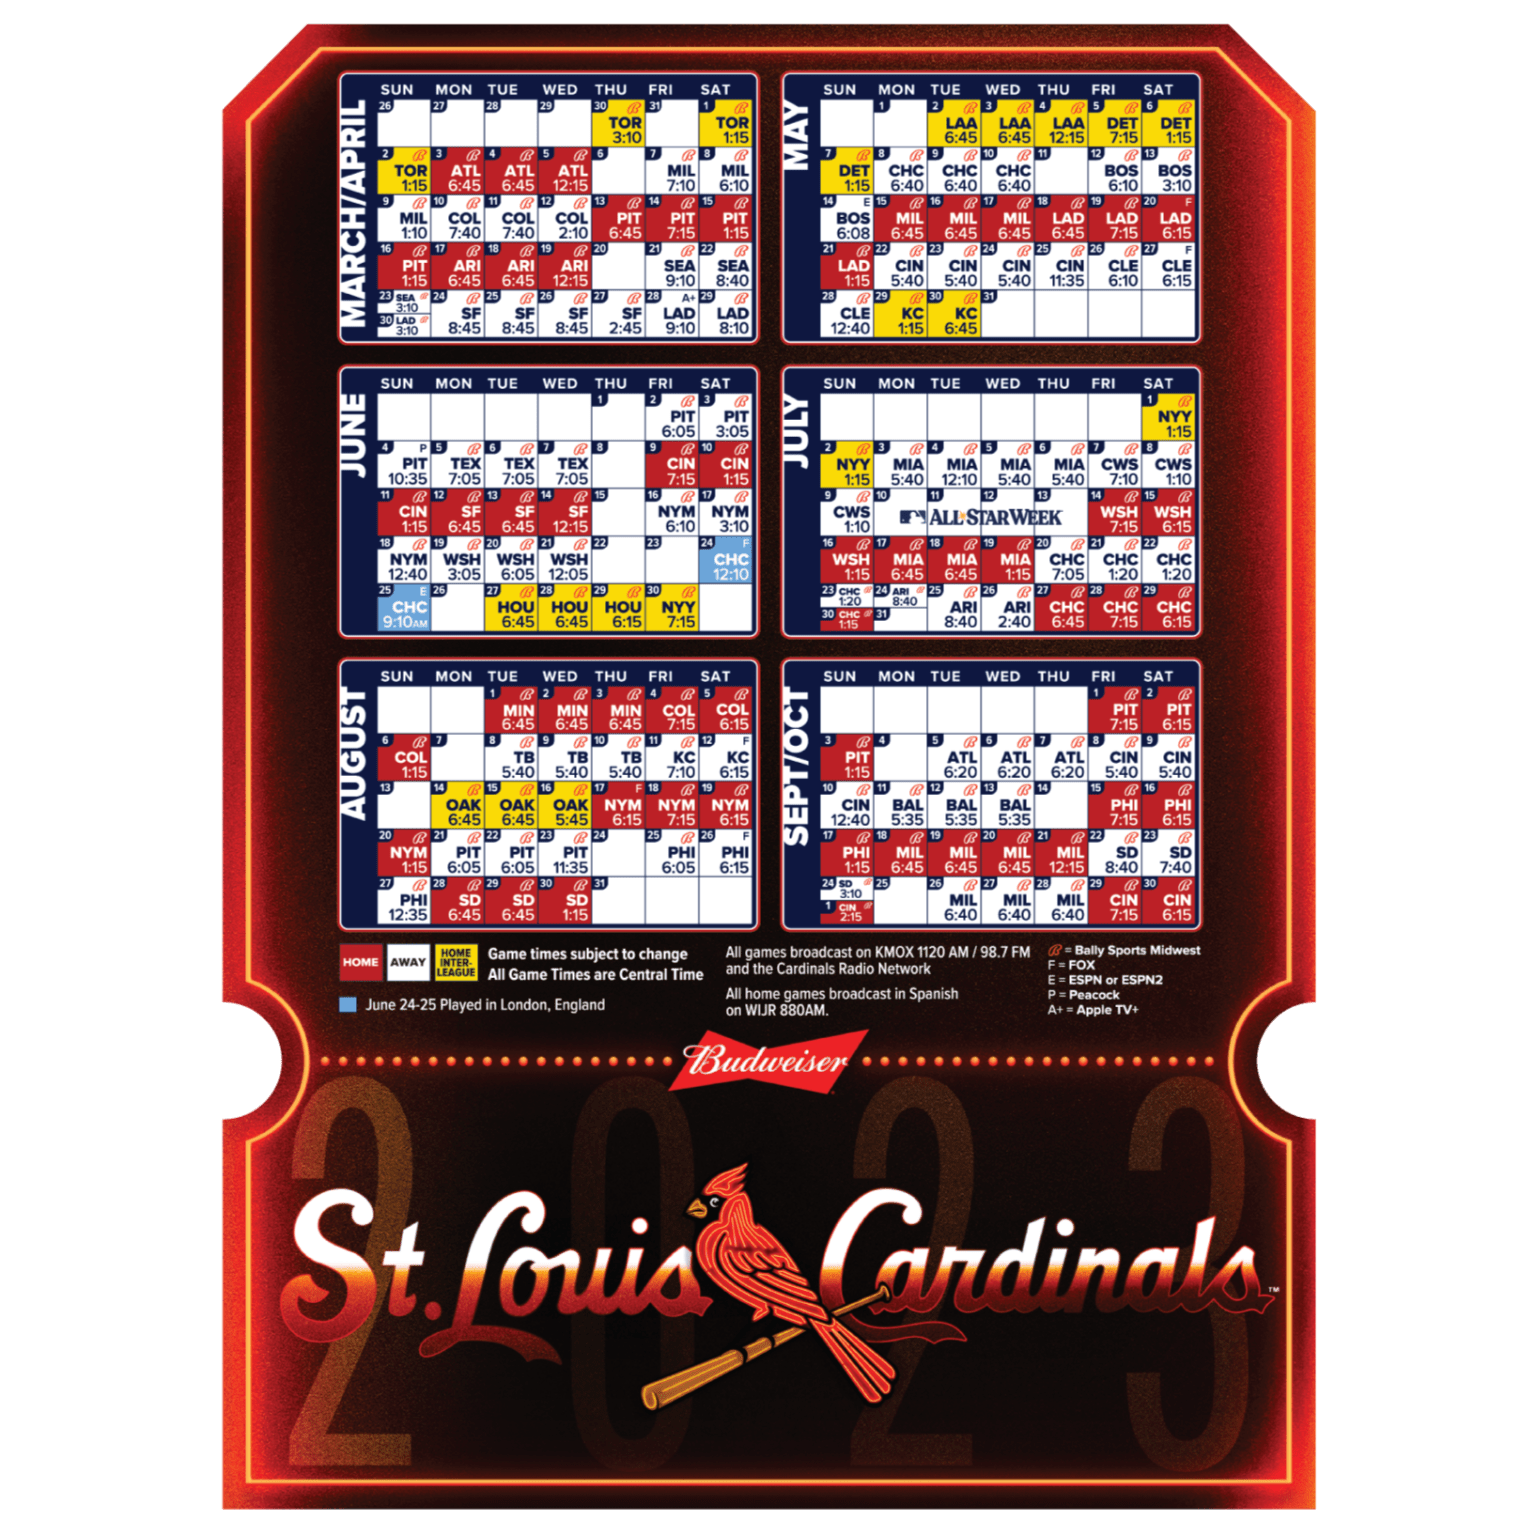 Sold at Auction: 13 - St. Louis Cardinals Team Sets + 50 Card Sealed  Assortment of Cardinals